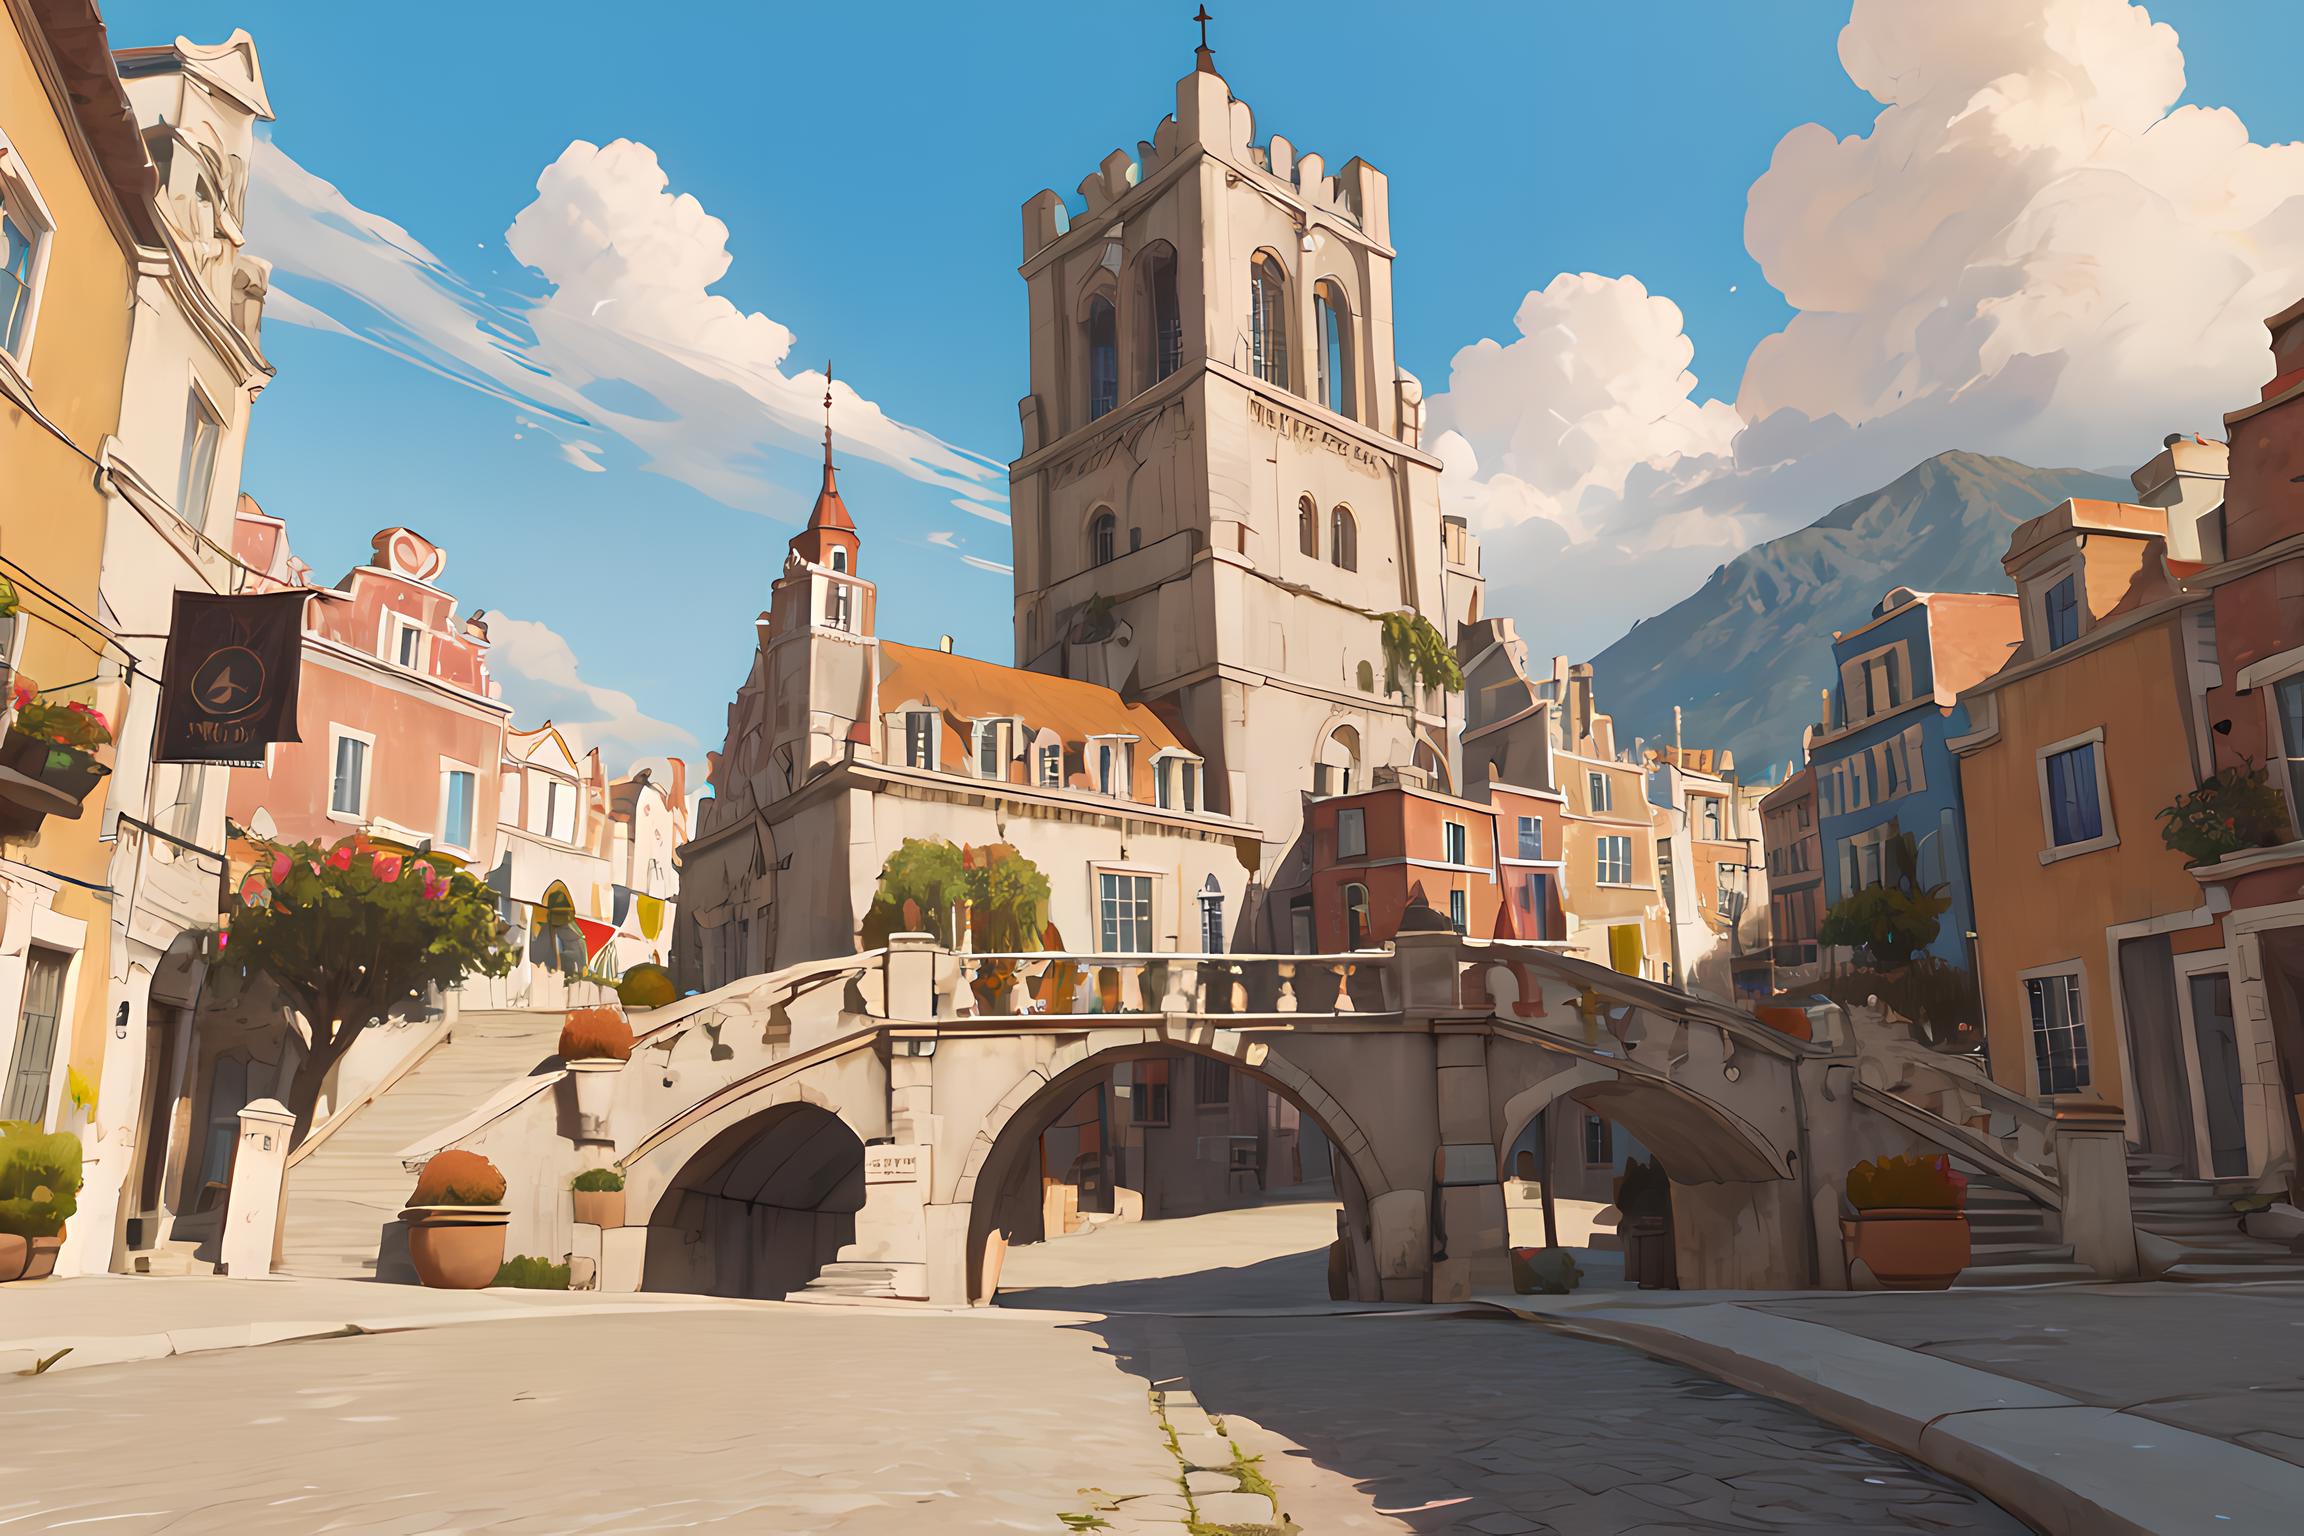 Beauclair city (Witcher) image by XiMiRaL